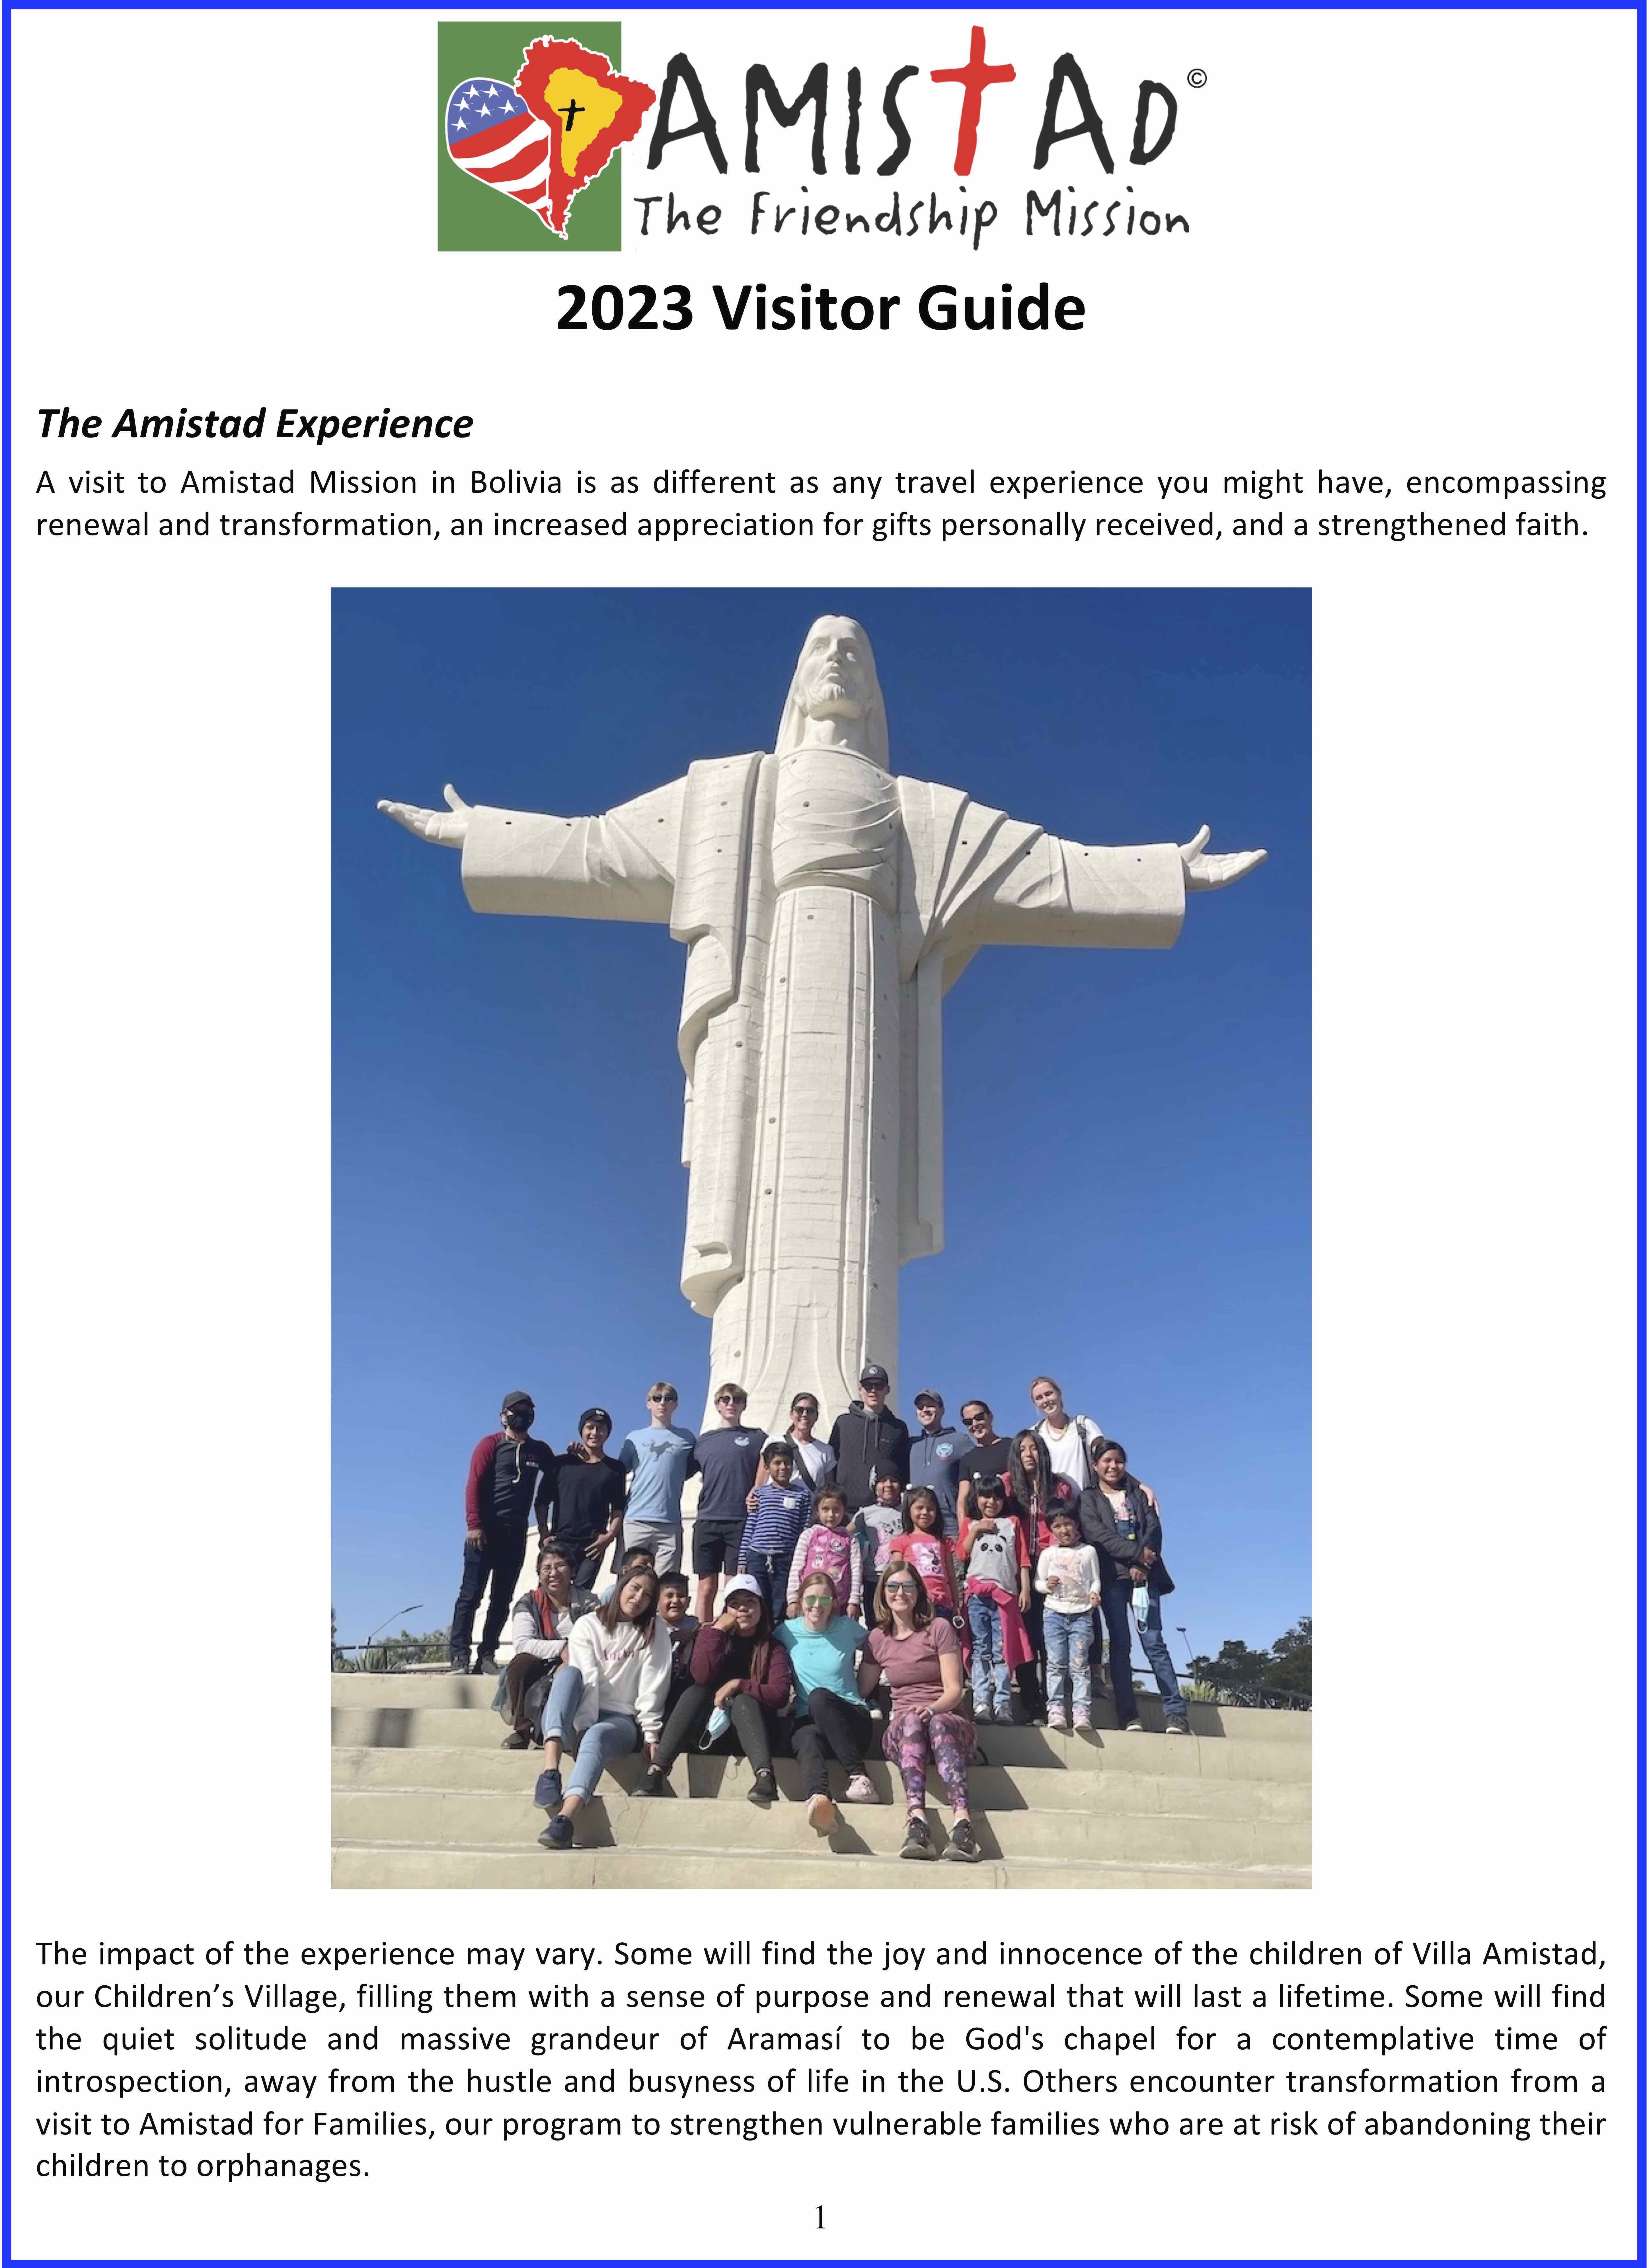 amistad-mission-visitor-guide-2023_414